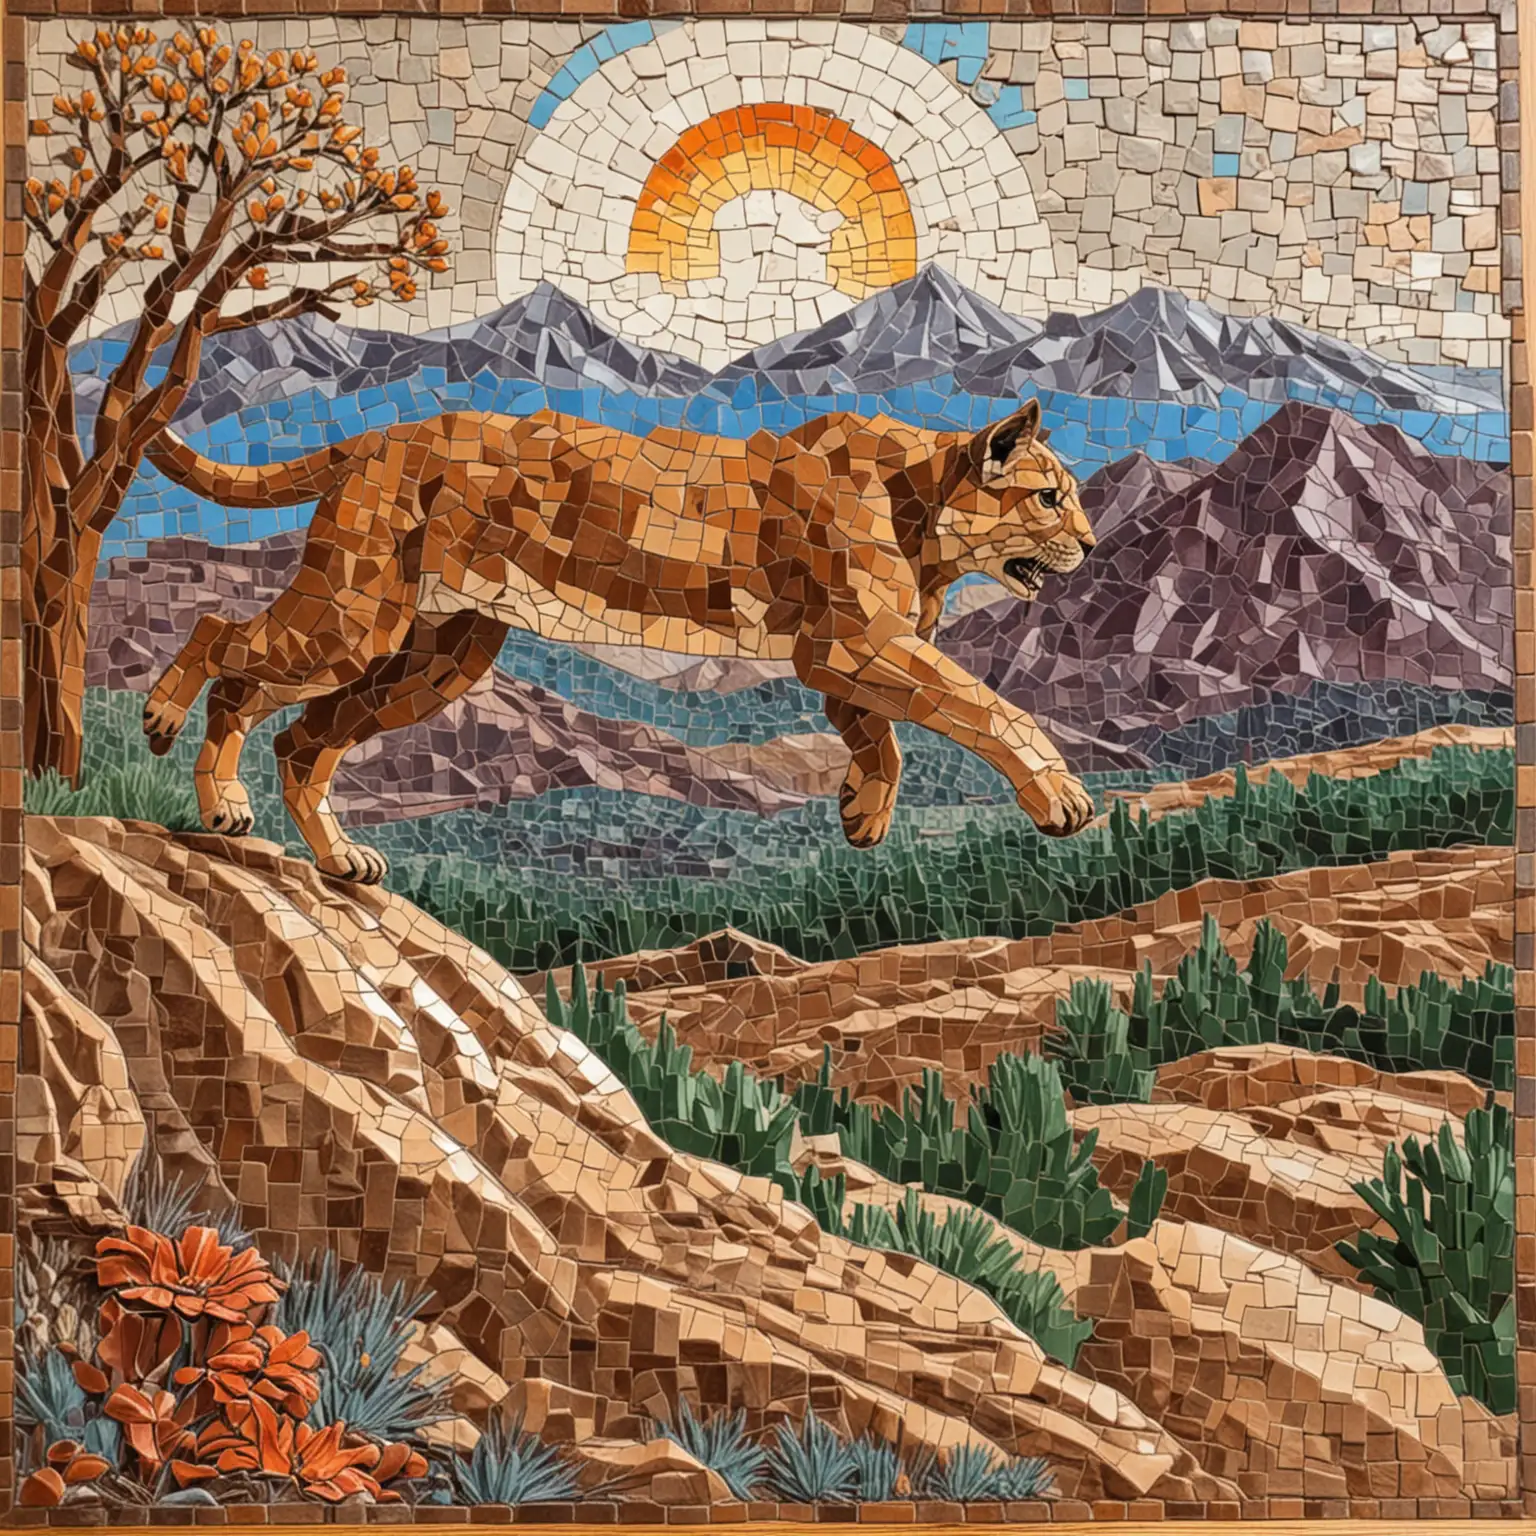 Mosaic with mountains in New Mexico in the background  made from flat ceramic tiles and a wood  relief carved  mountain lion jumping off a rock.  